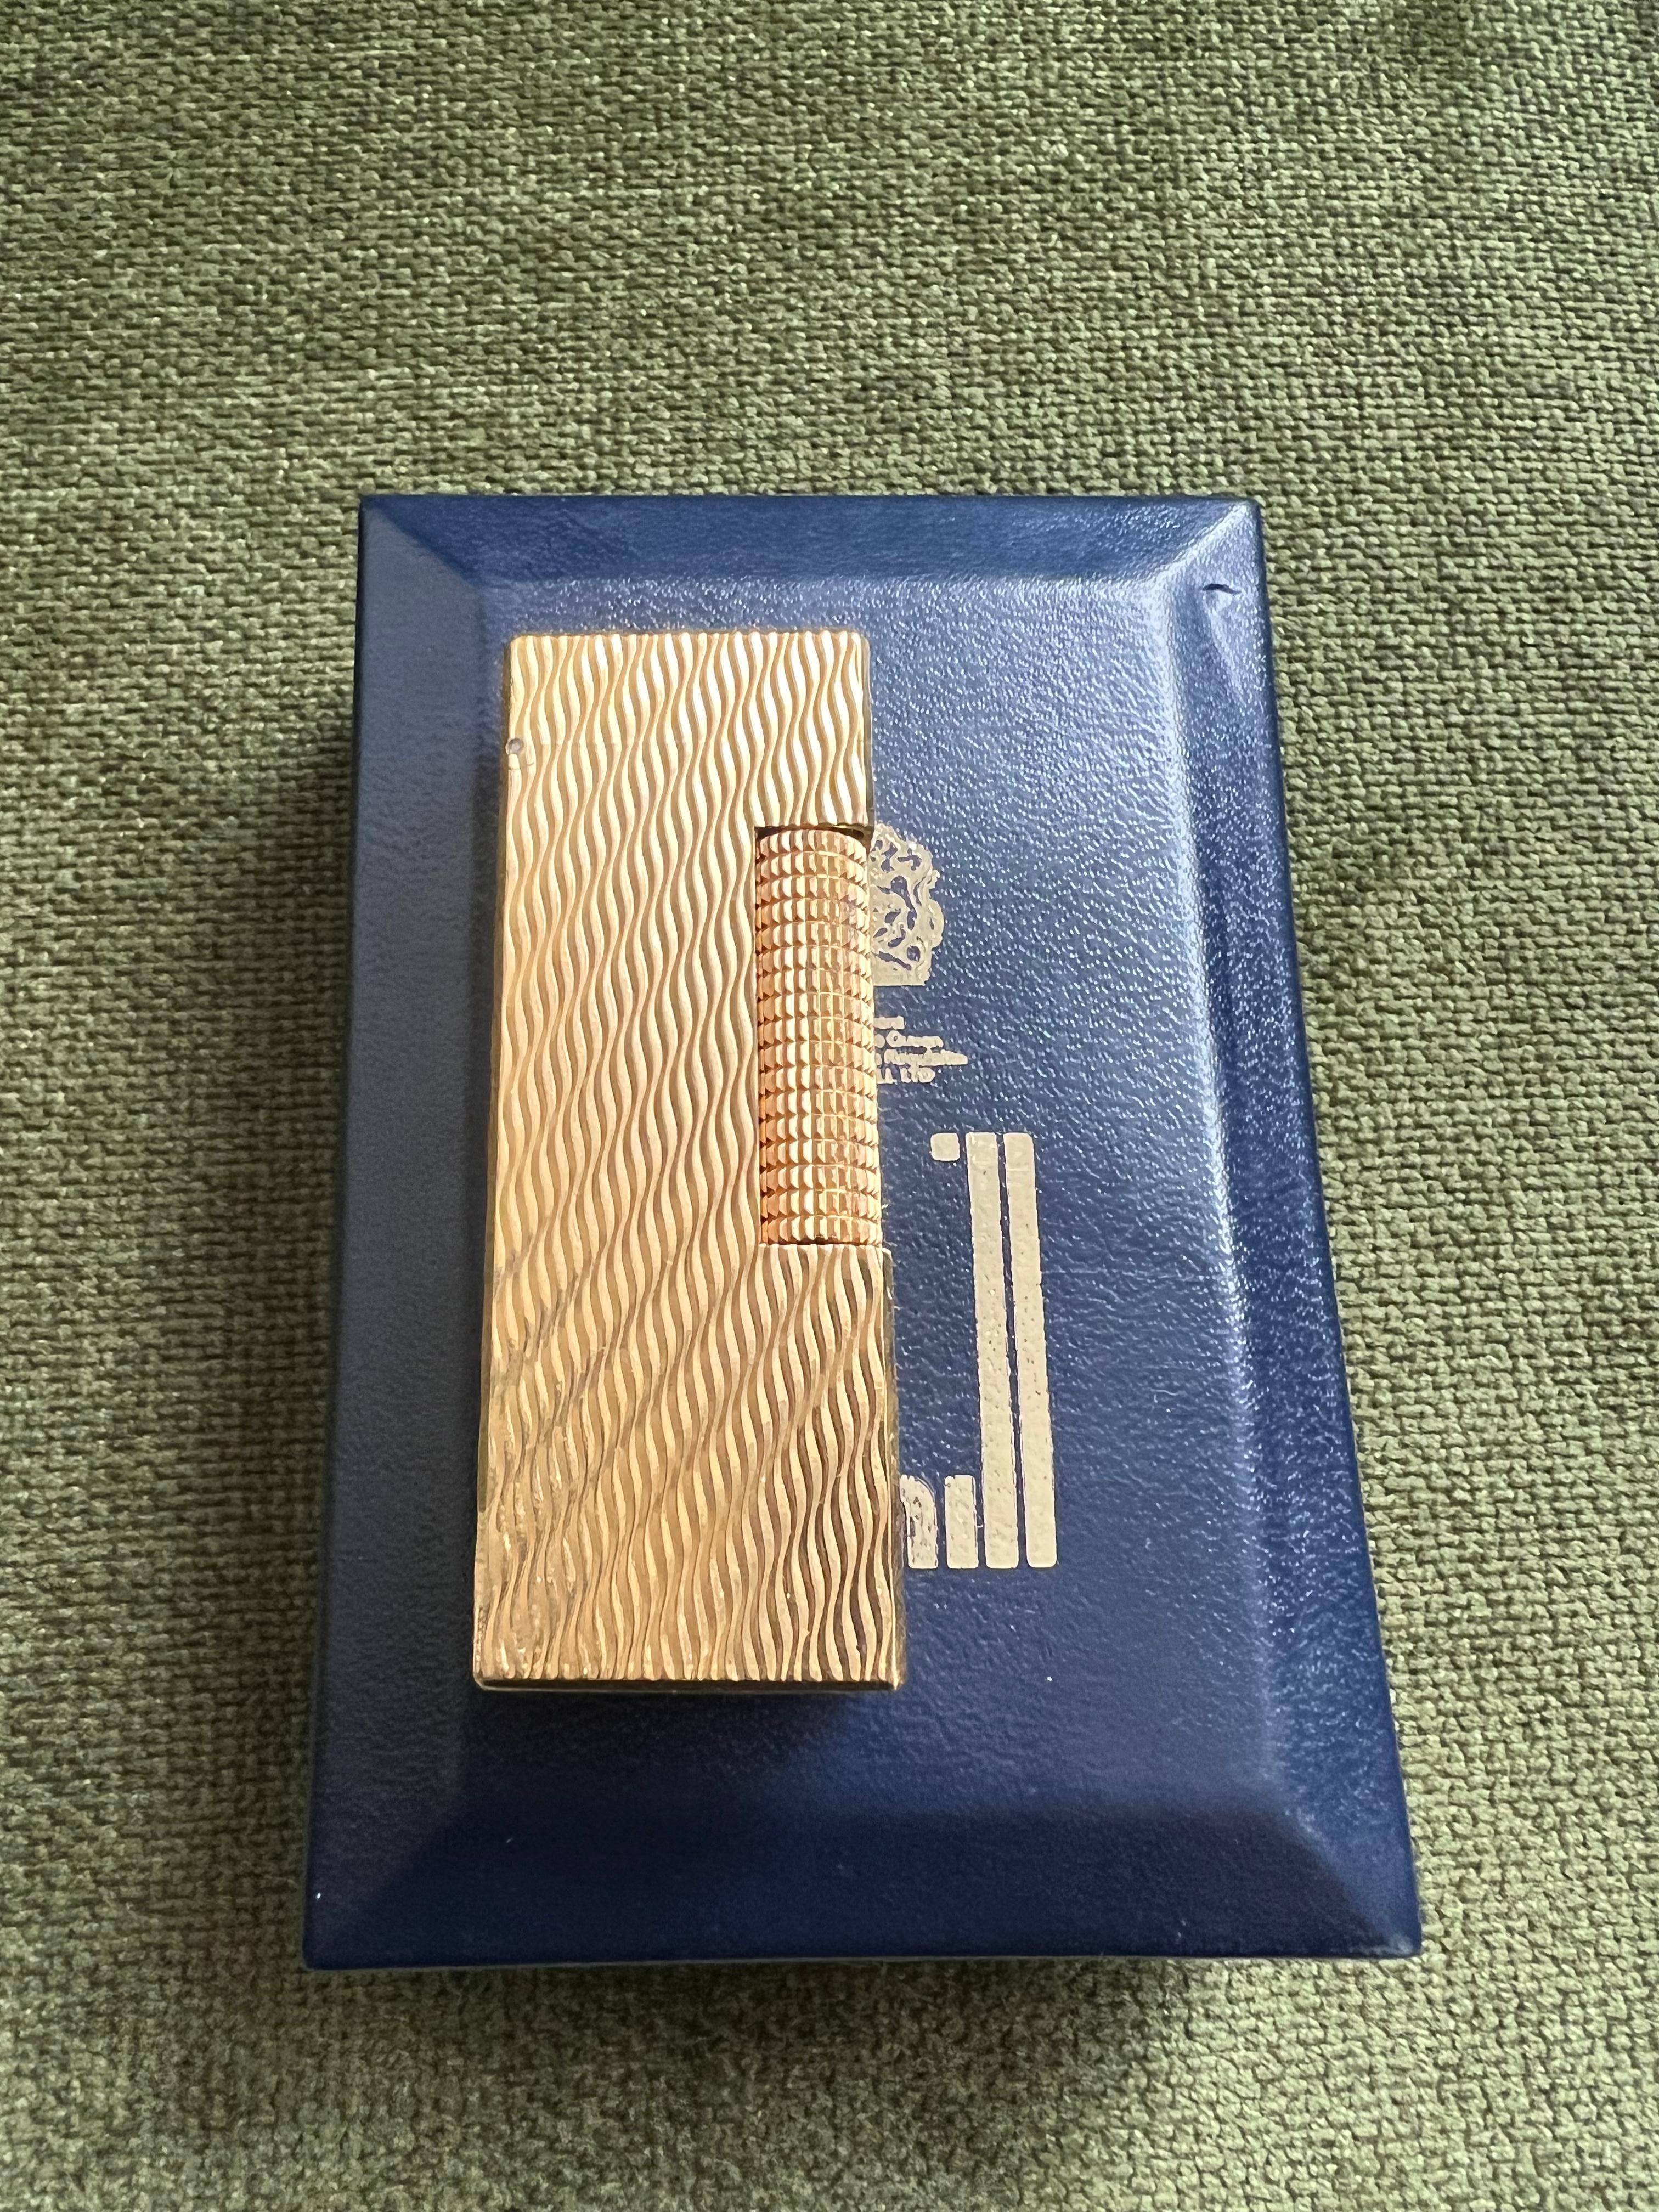 Rare Iconic Vintage and Elegant Dunhill Gold Swiss Made Lighter. 
As seen in the James Bond film. 
Dunhill gold plated Swiss Made lighter In mint condition. 
Works perfectly.  
Rare wave pattern 
Iconic and beautifully engineered piece in rare